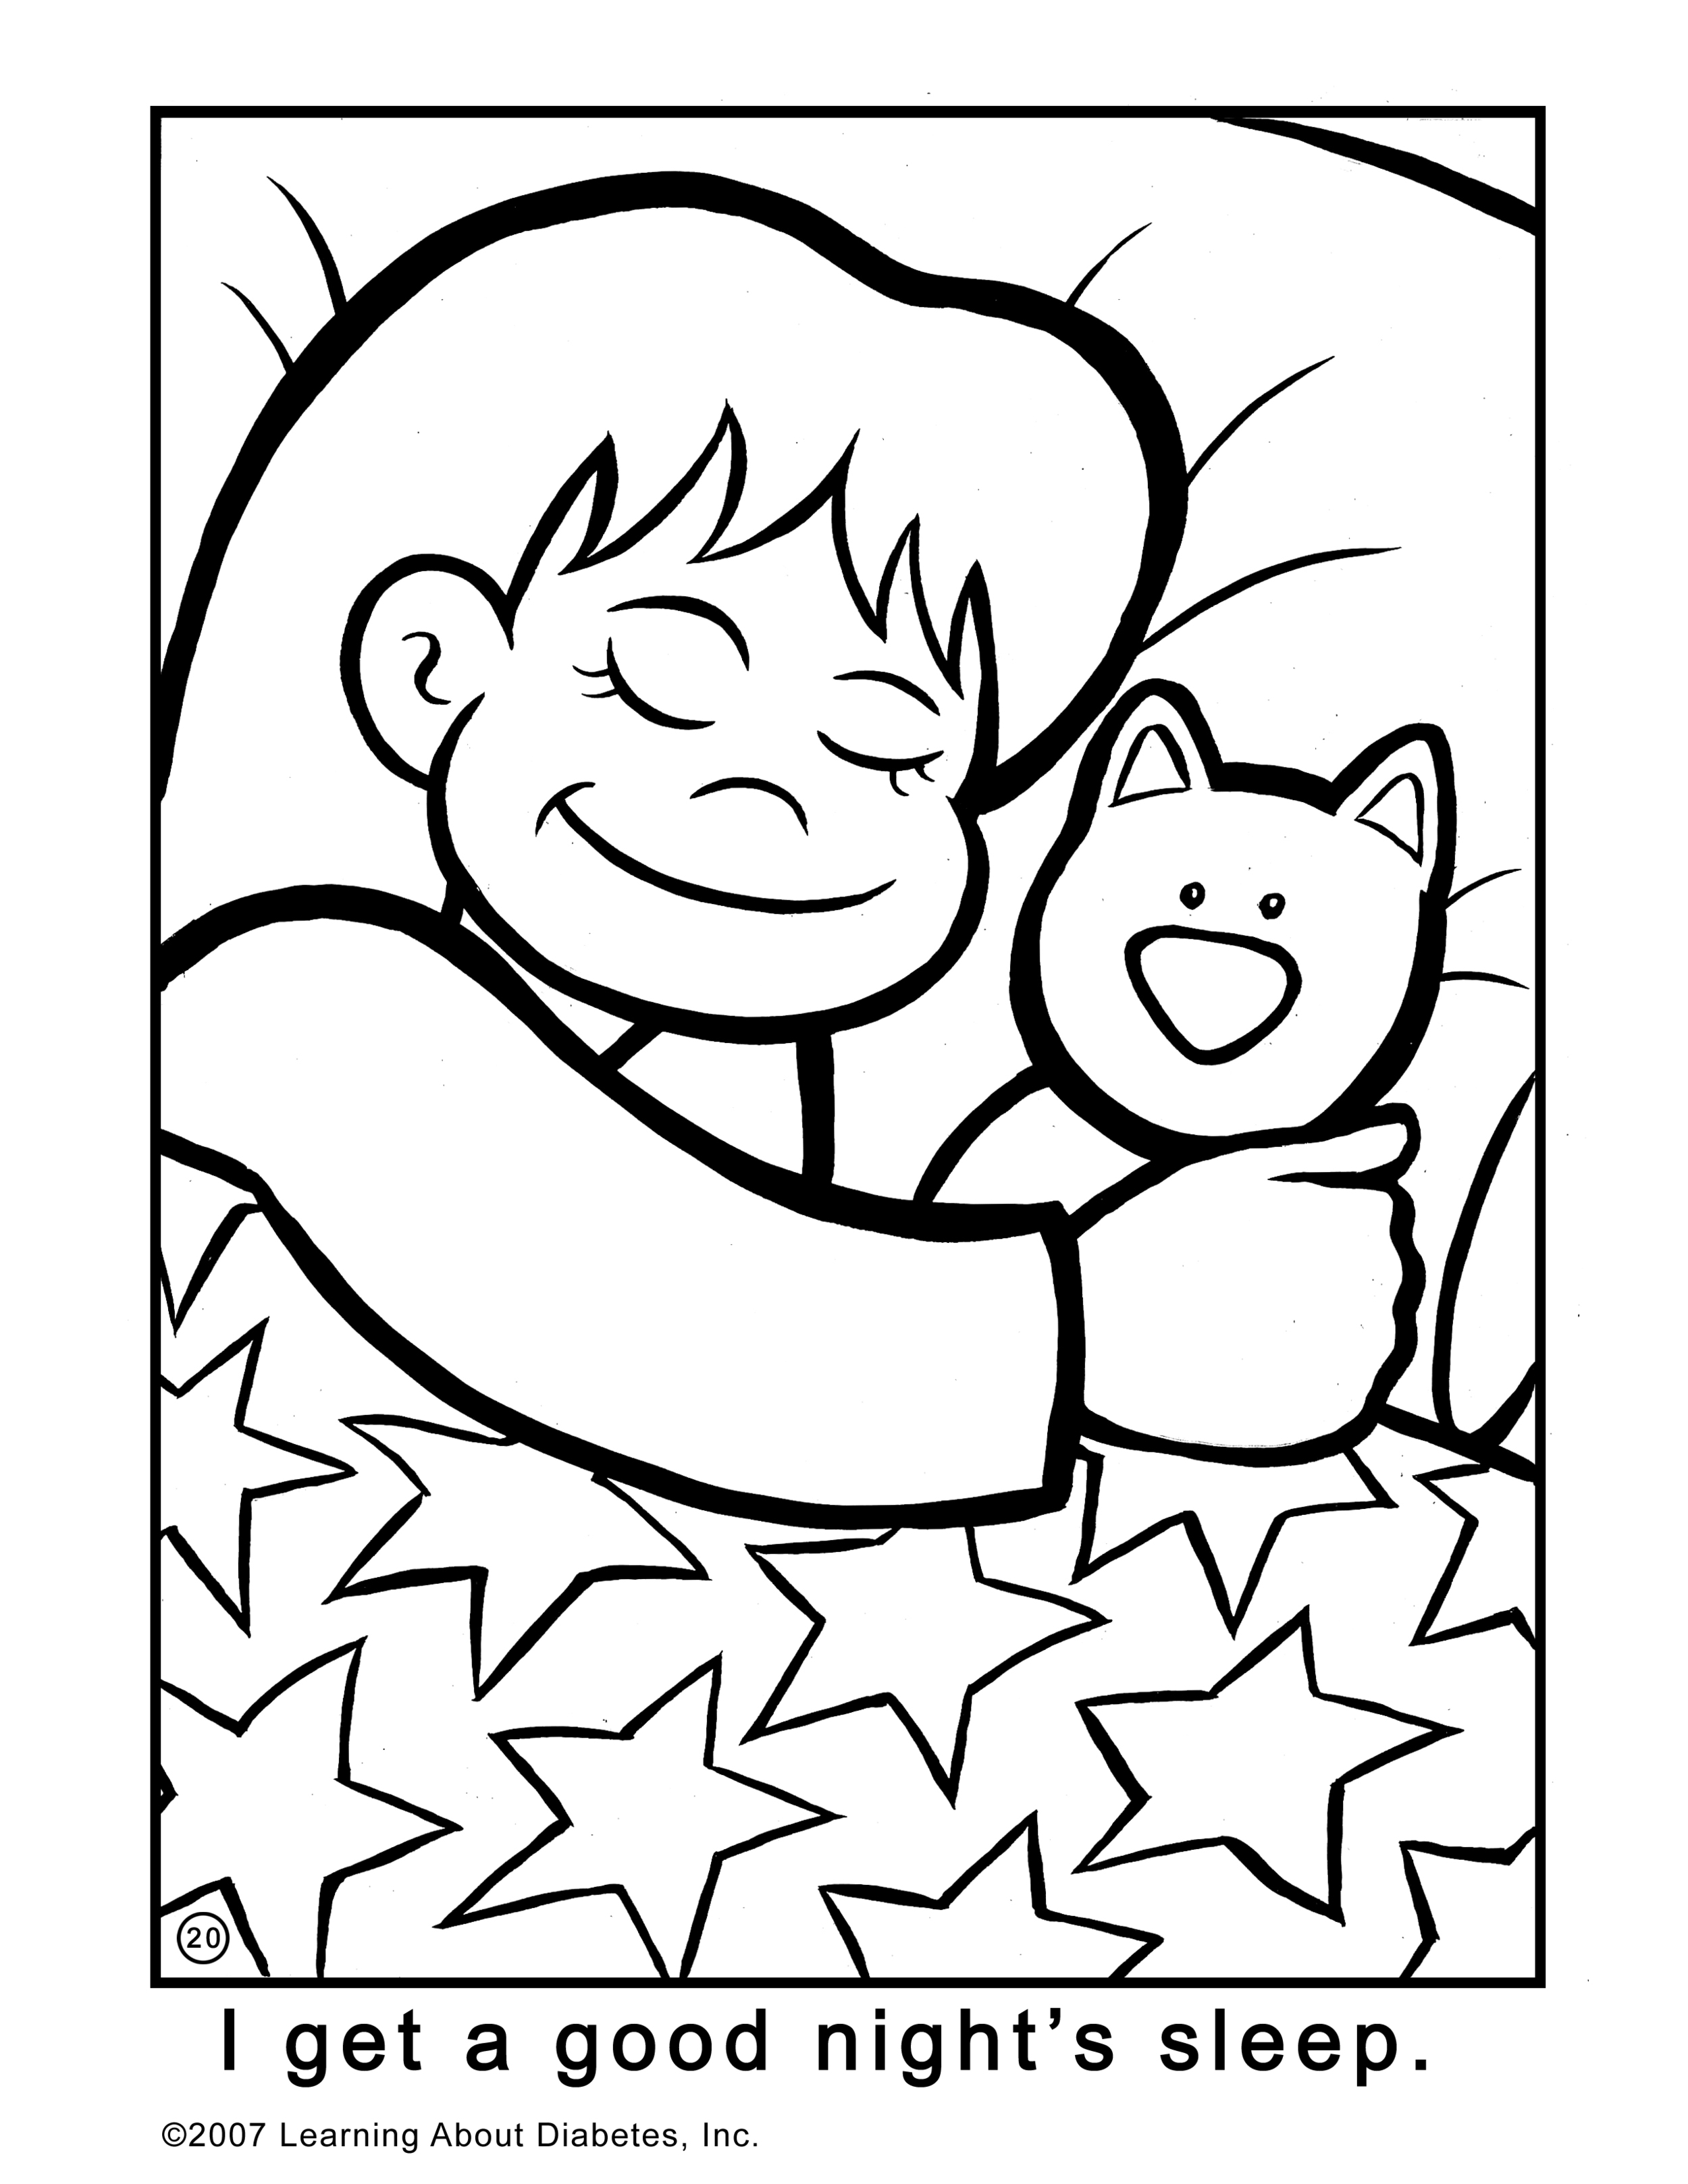 Coloring Page for "Welcome To My World!"